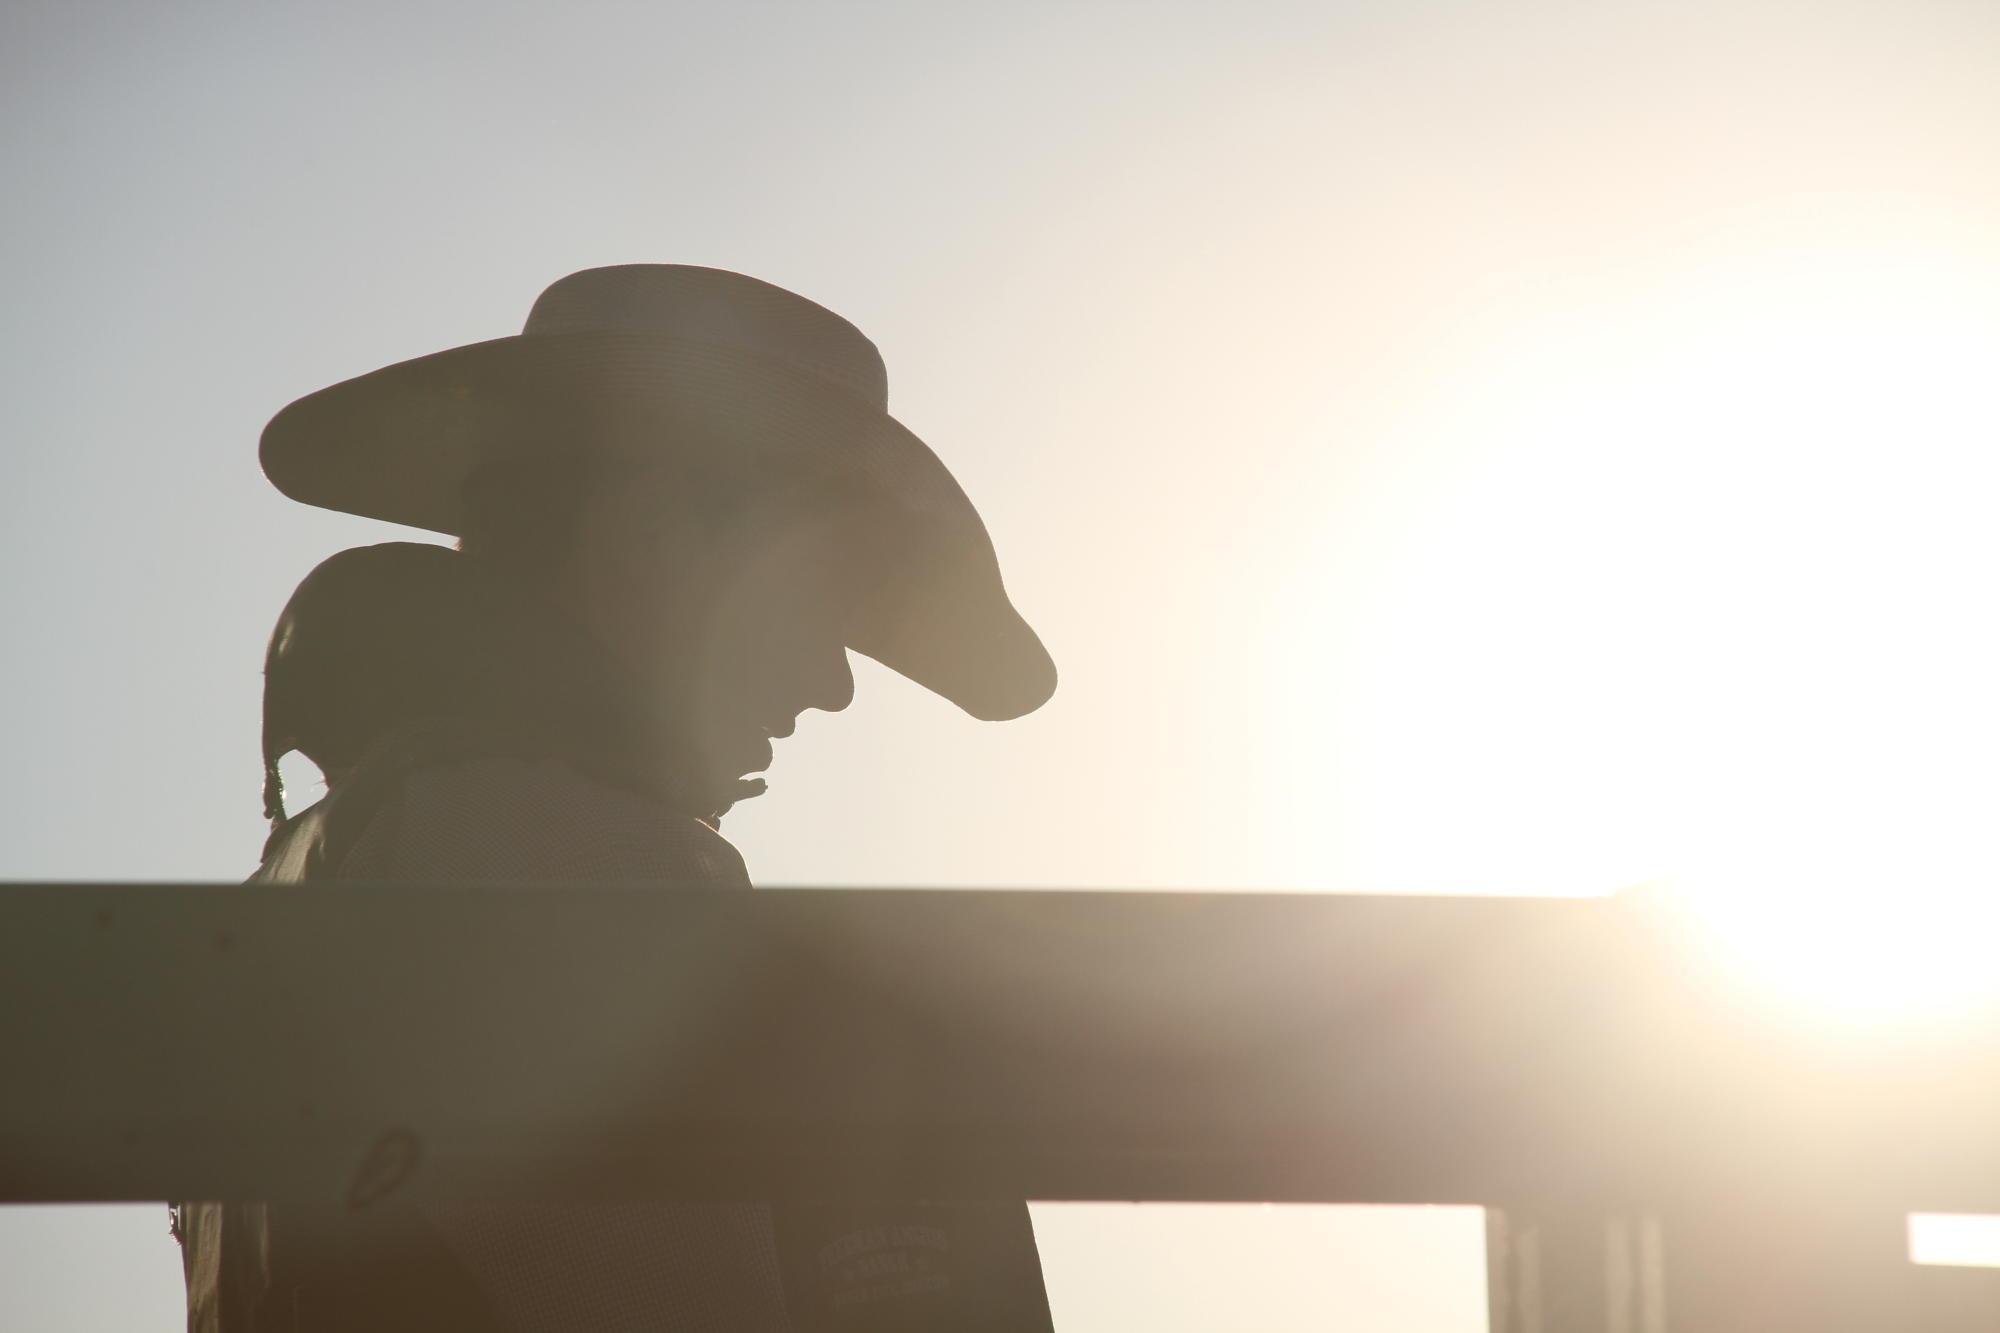 Silhouette of a person wearing a cowboy hat